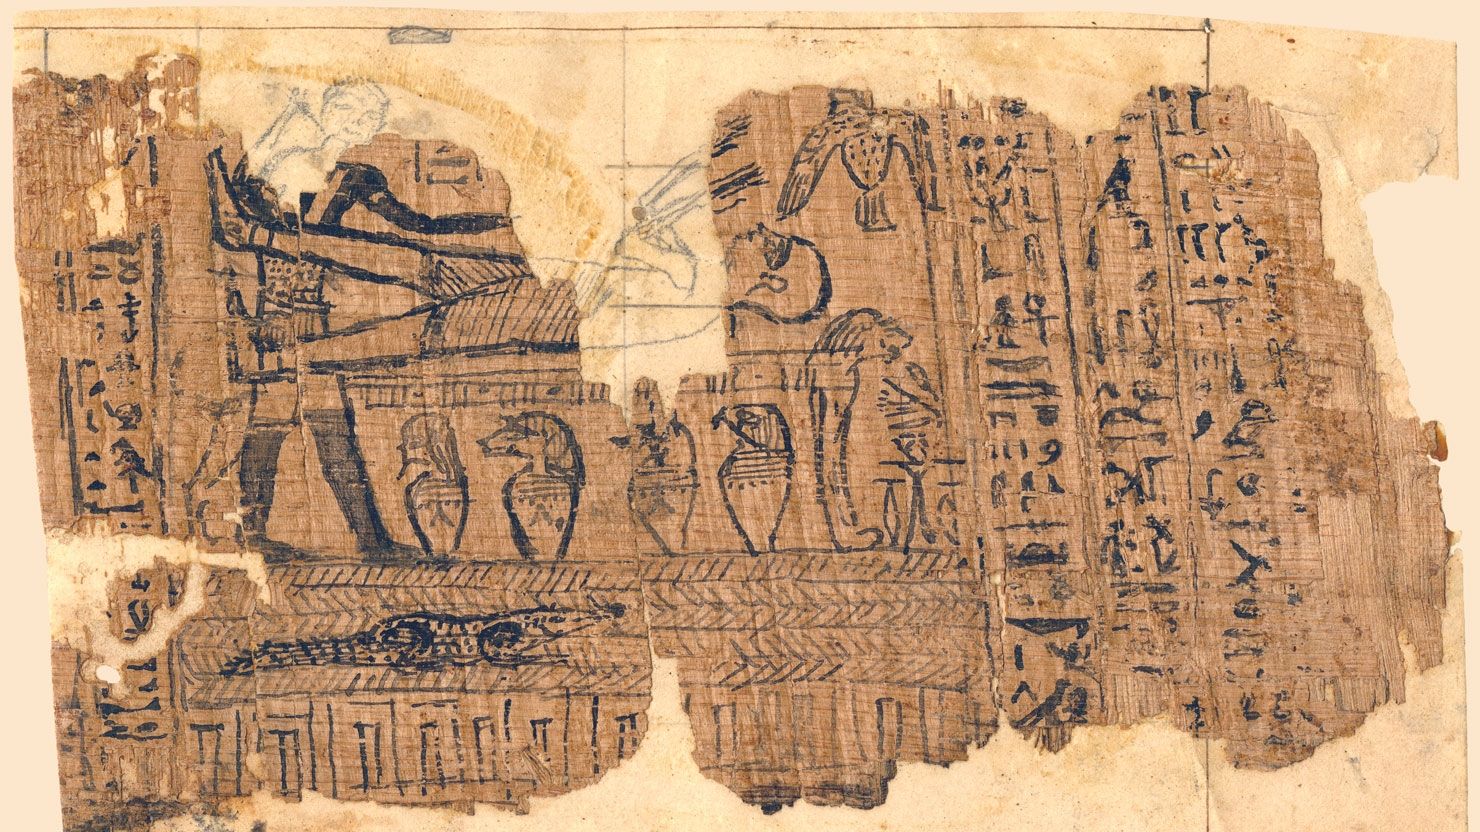 What Is Papyrus In Ancient Egypt